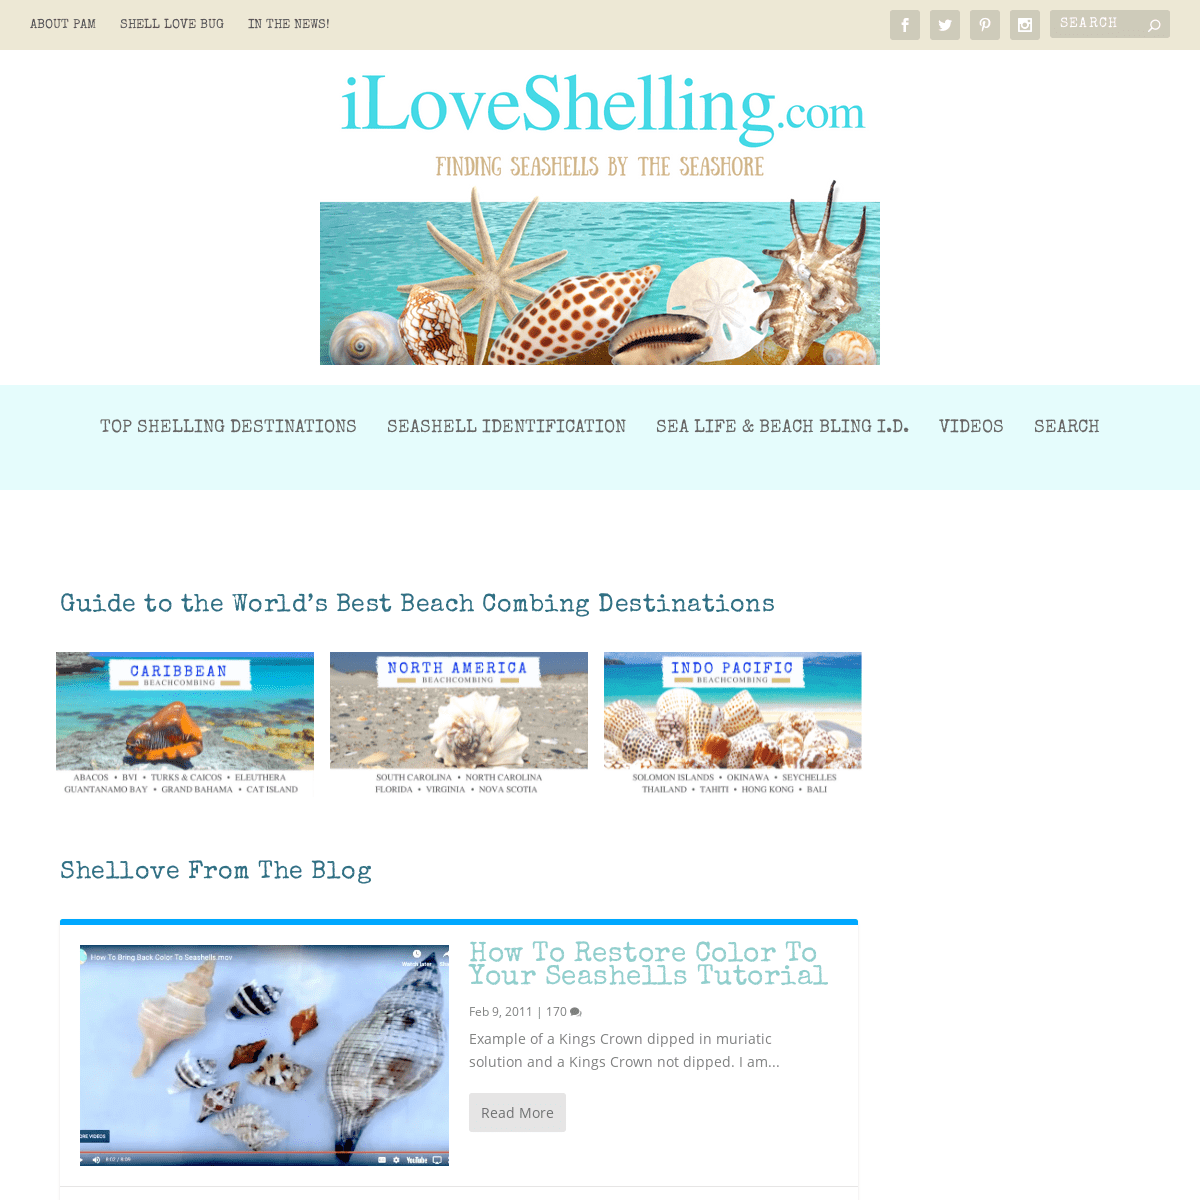 A complete backup of https://iloveshelling.com